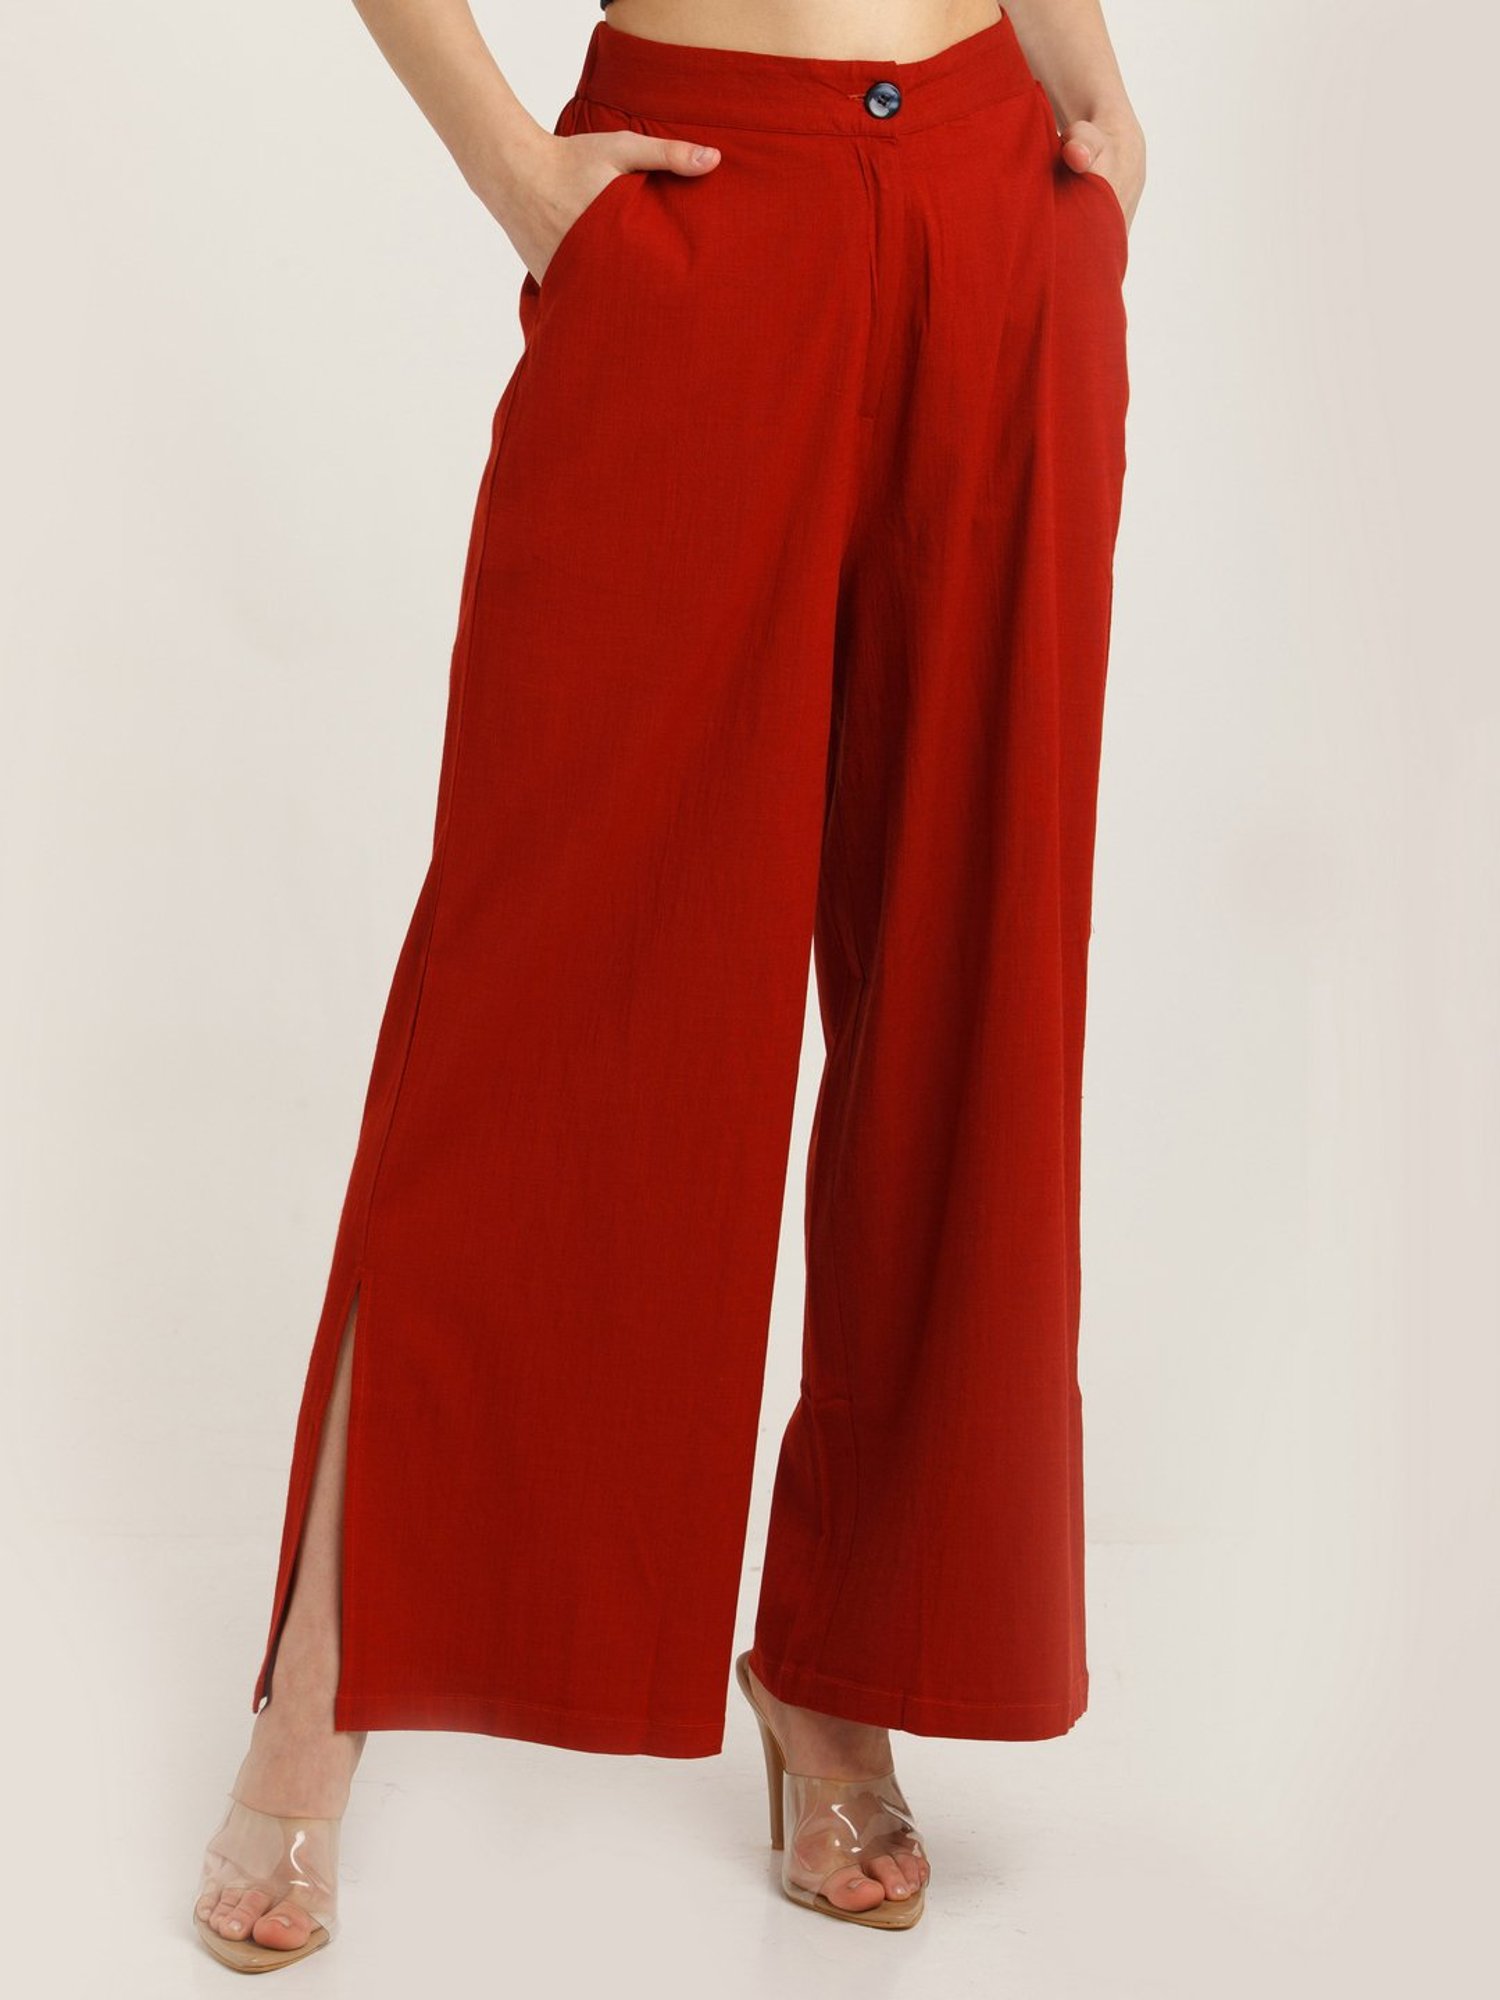 Ladies Red Trousers  Ruby  Burgundy Trousers  JD Williams